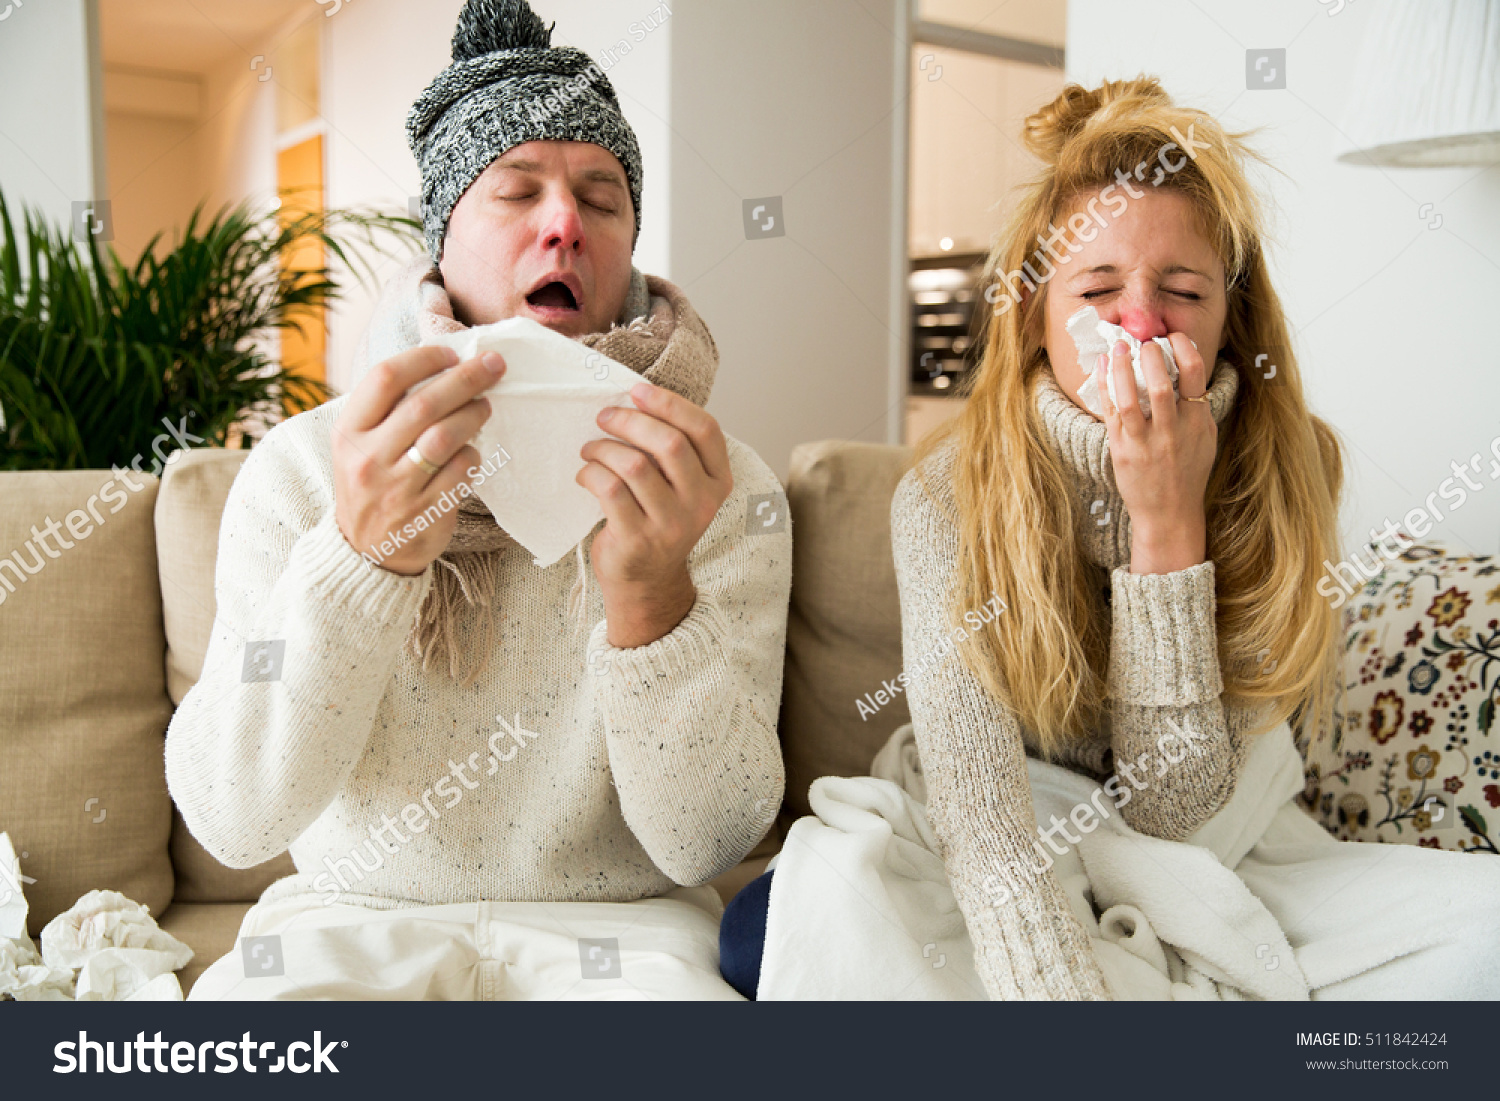 Sick couple catch cold. Man and woman sneezing, coughing. People got flu, having runny nose.
 #511842424